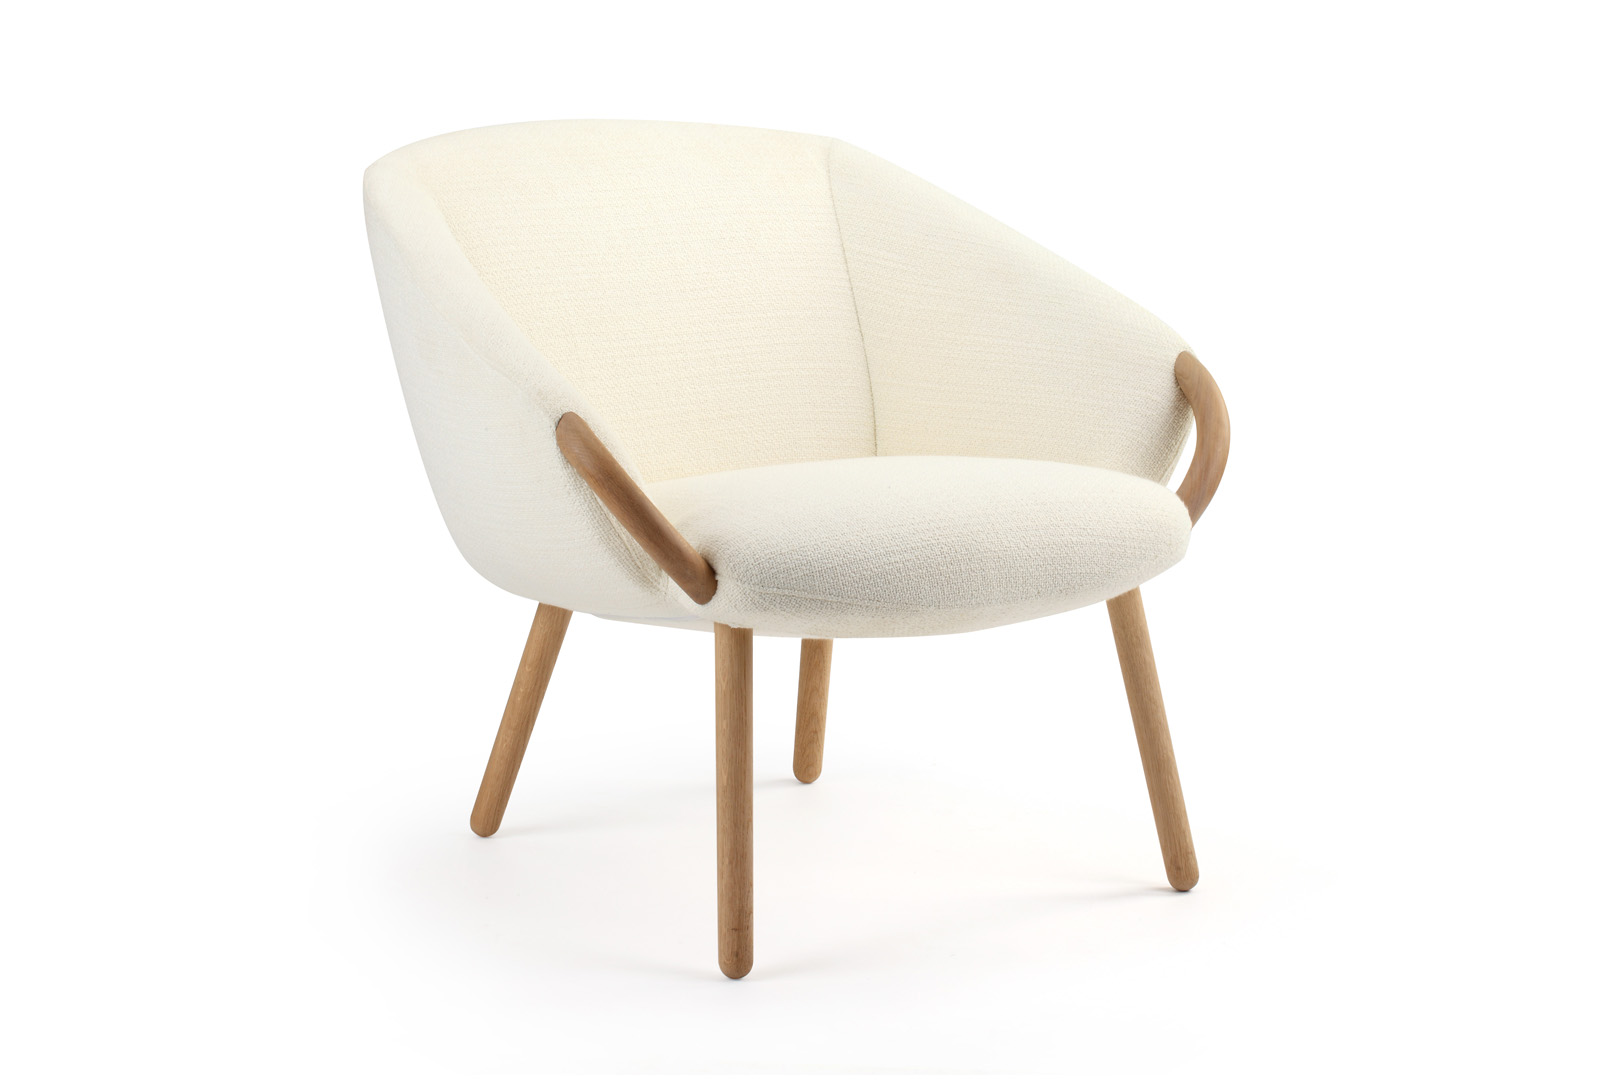 LINK WOOD CHAIR